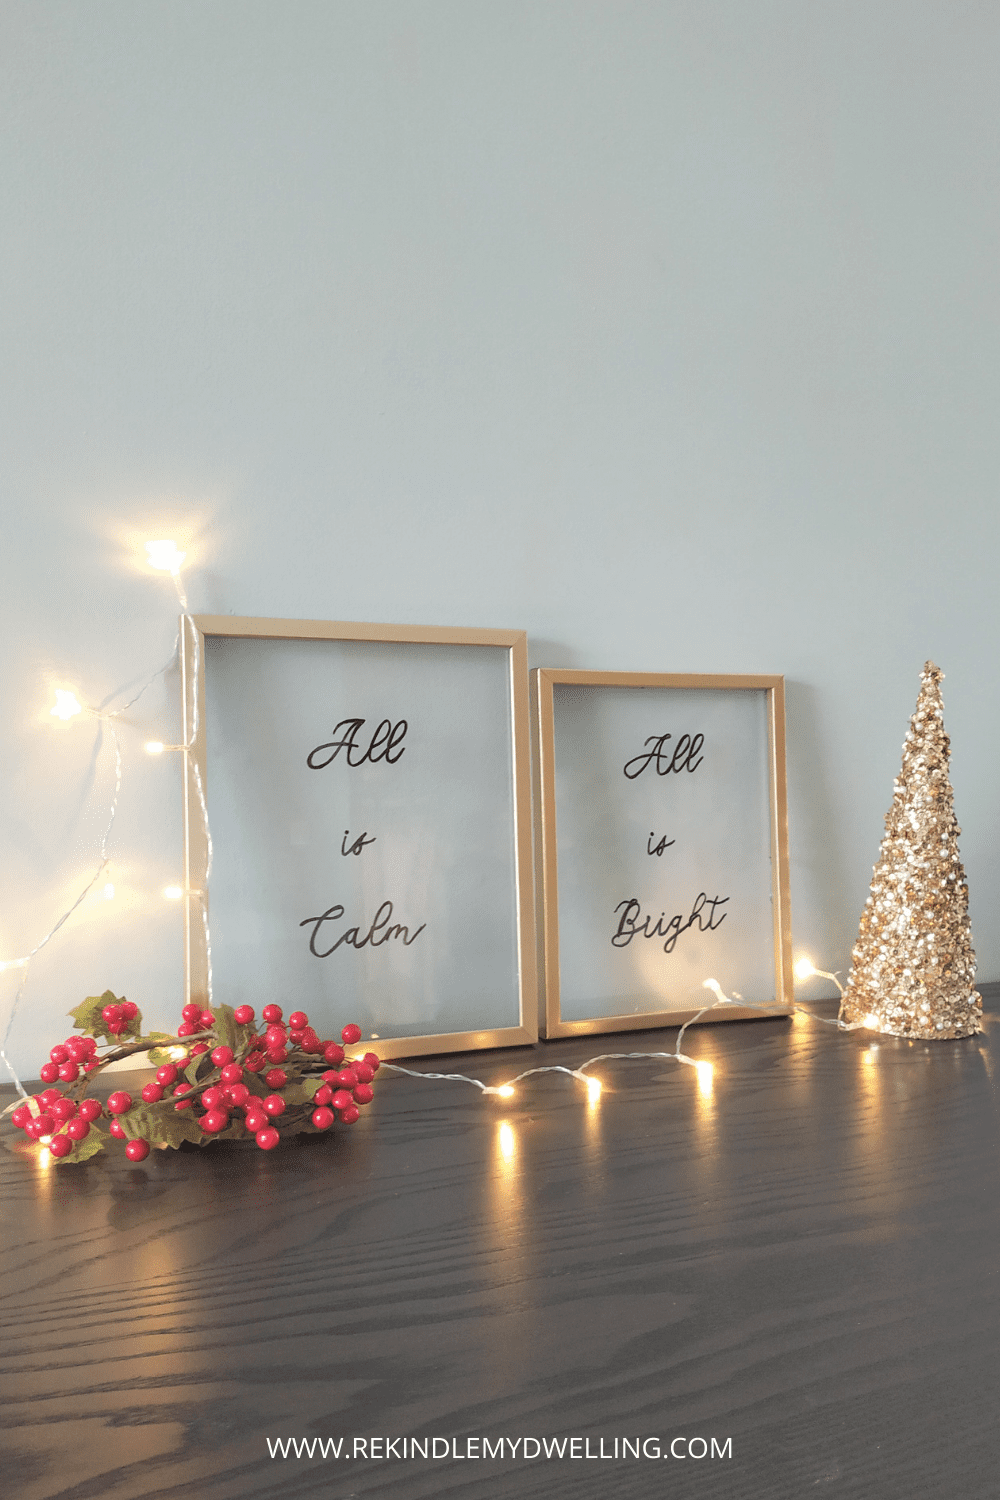 Framed glass floating signs next to lights, holly and a mini Christmas tree.